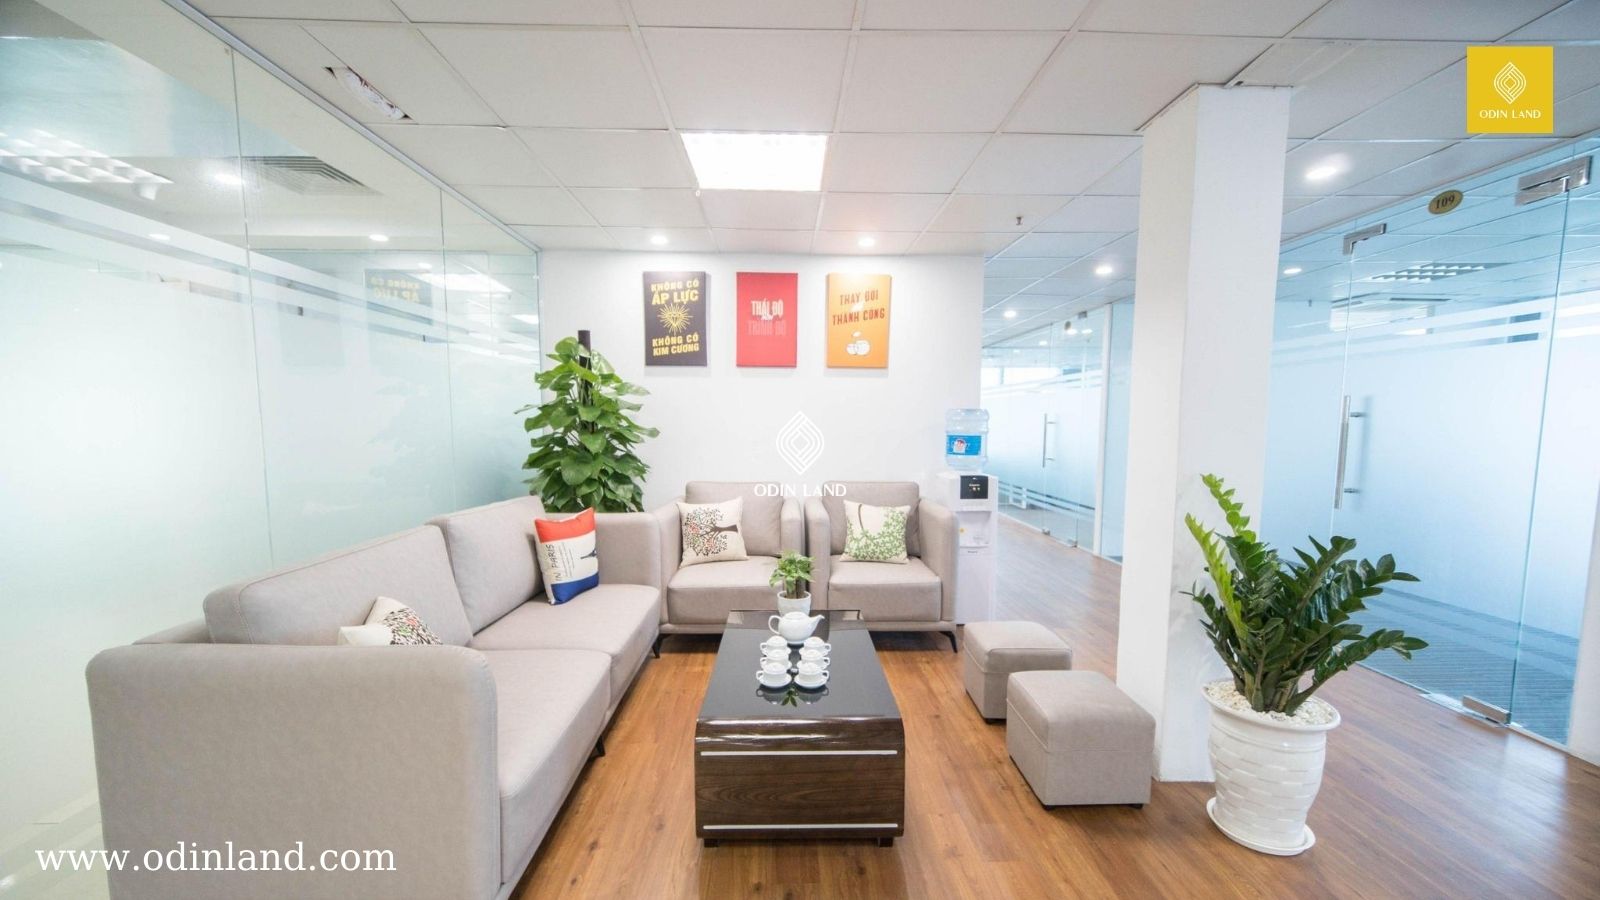 Văn Phòng Chia Sẻ Alo Office Coworking (1)